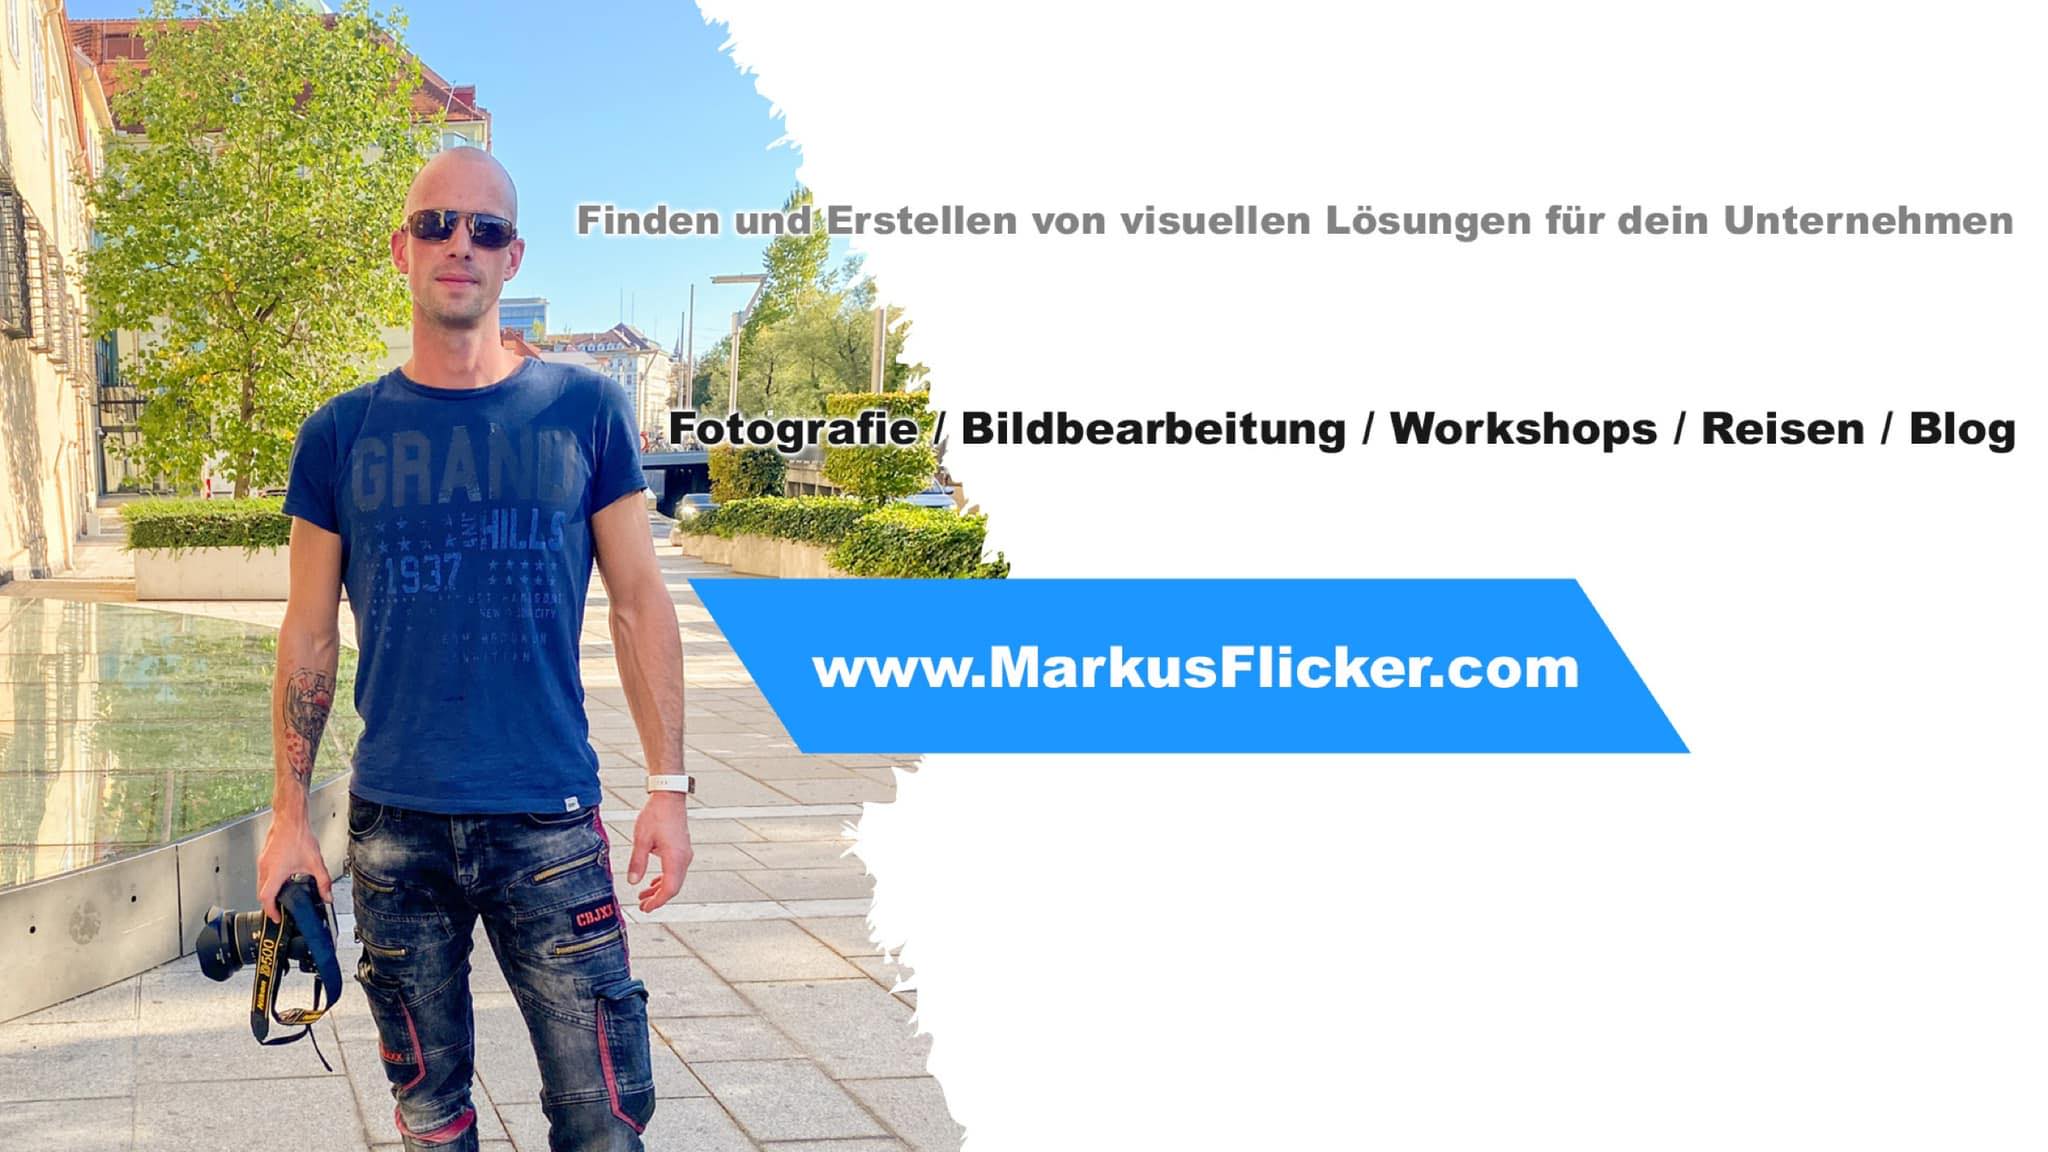 Markus Flicker Fotograf Videograf Contentcreator Author Photography Videography Graz Austria Advertising Image editing Workshops Travel Blog Styria Finding and creating visual solutions for your company Founded in 2012 Werbeagentur Marketingagentur